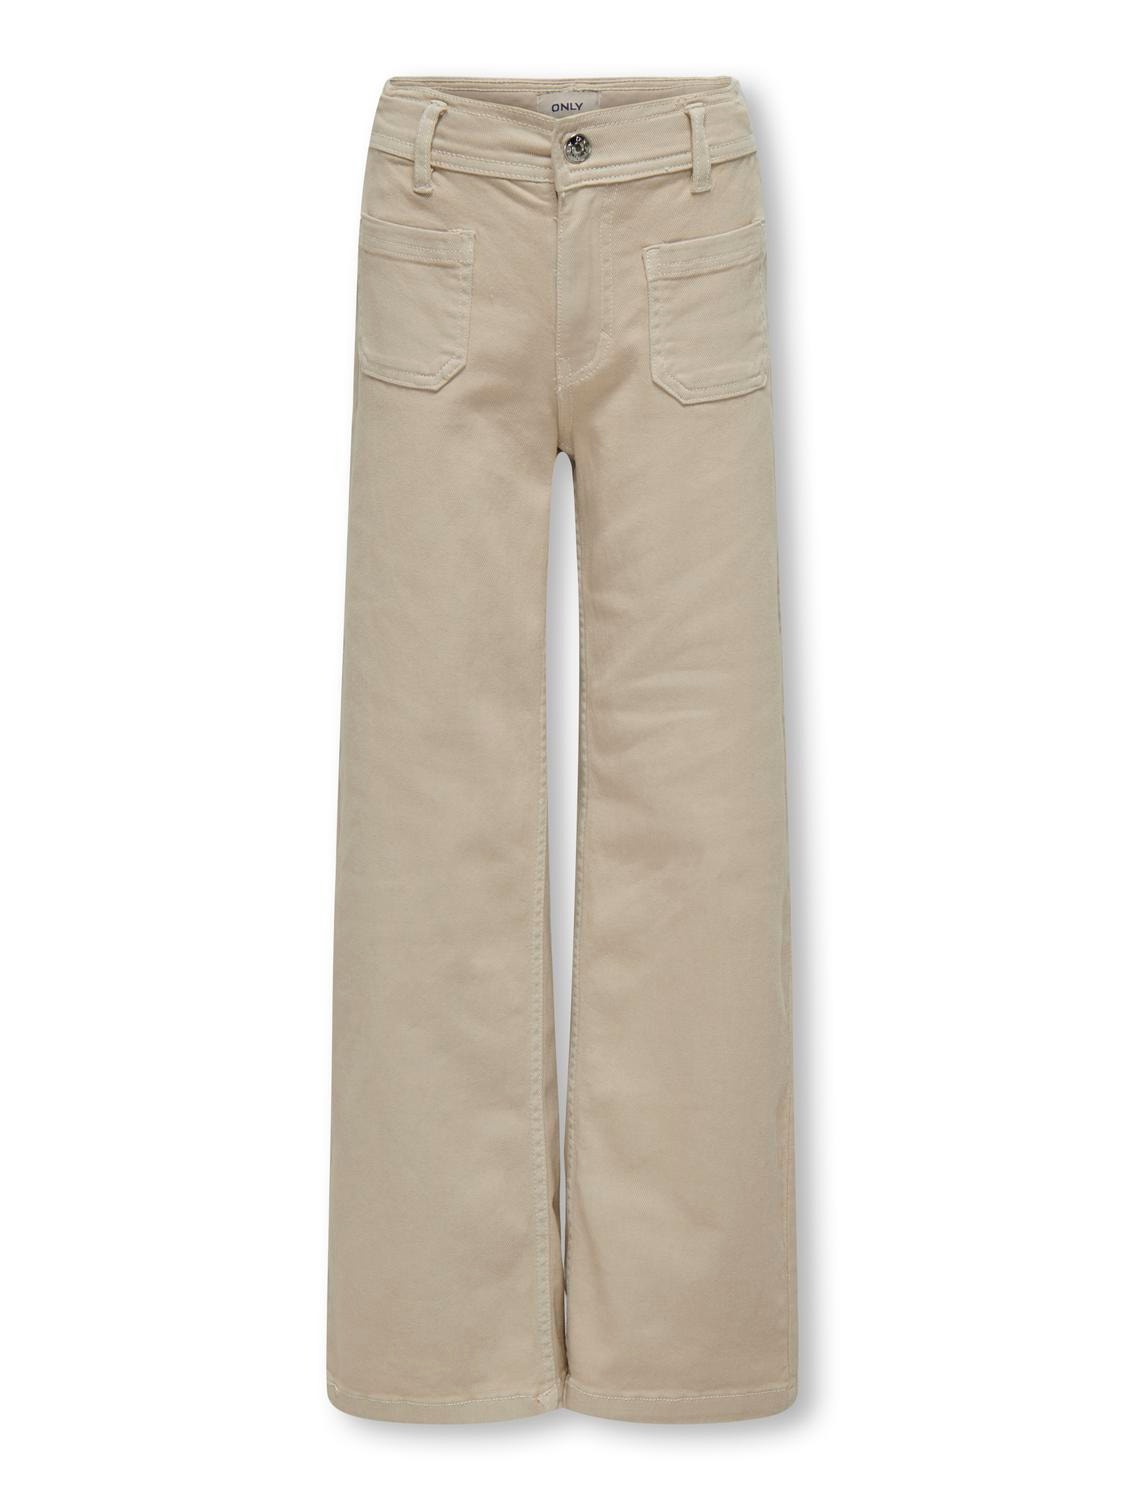 ONLY wide fit pants -Pumice Stone - 15306905